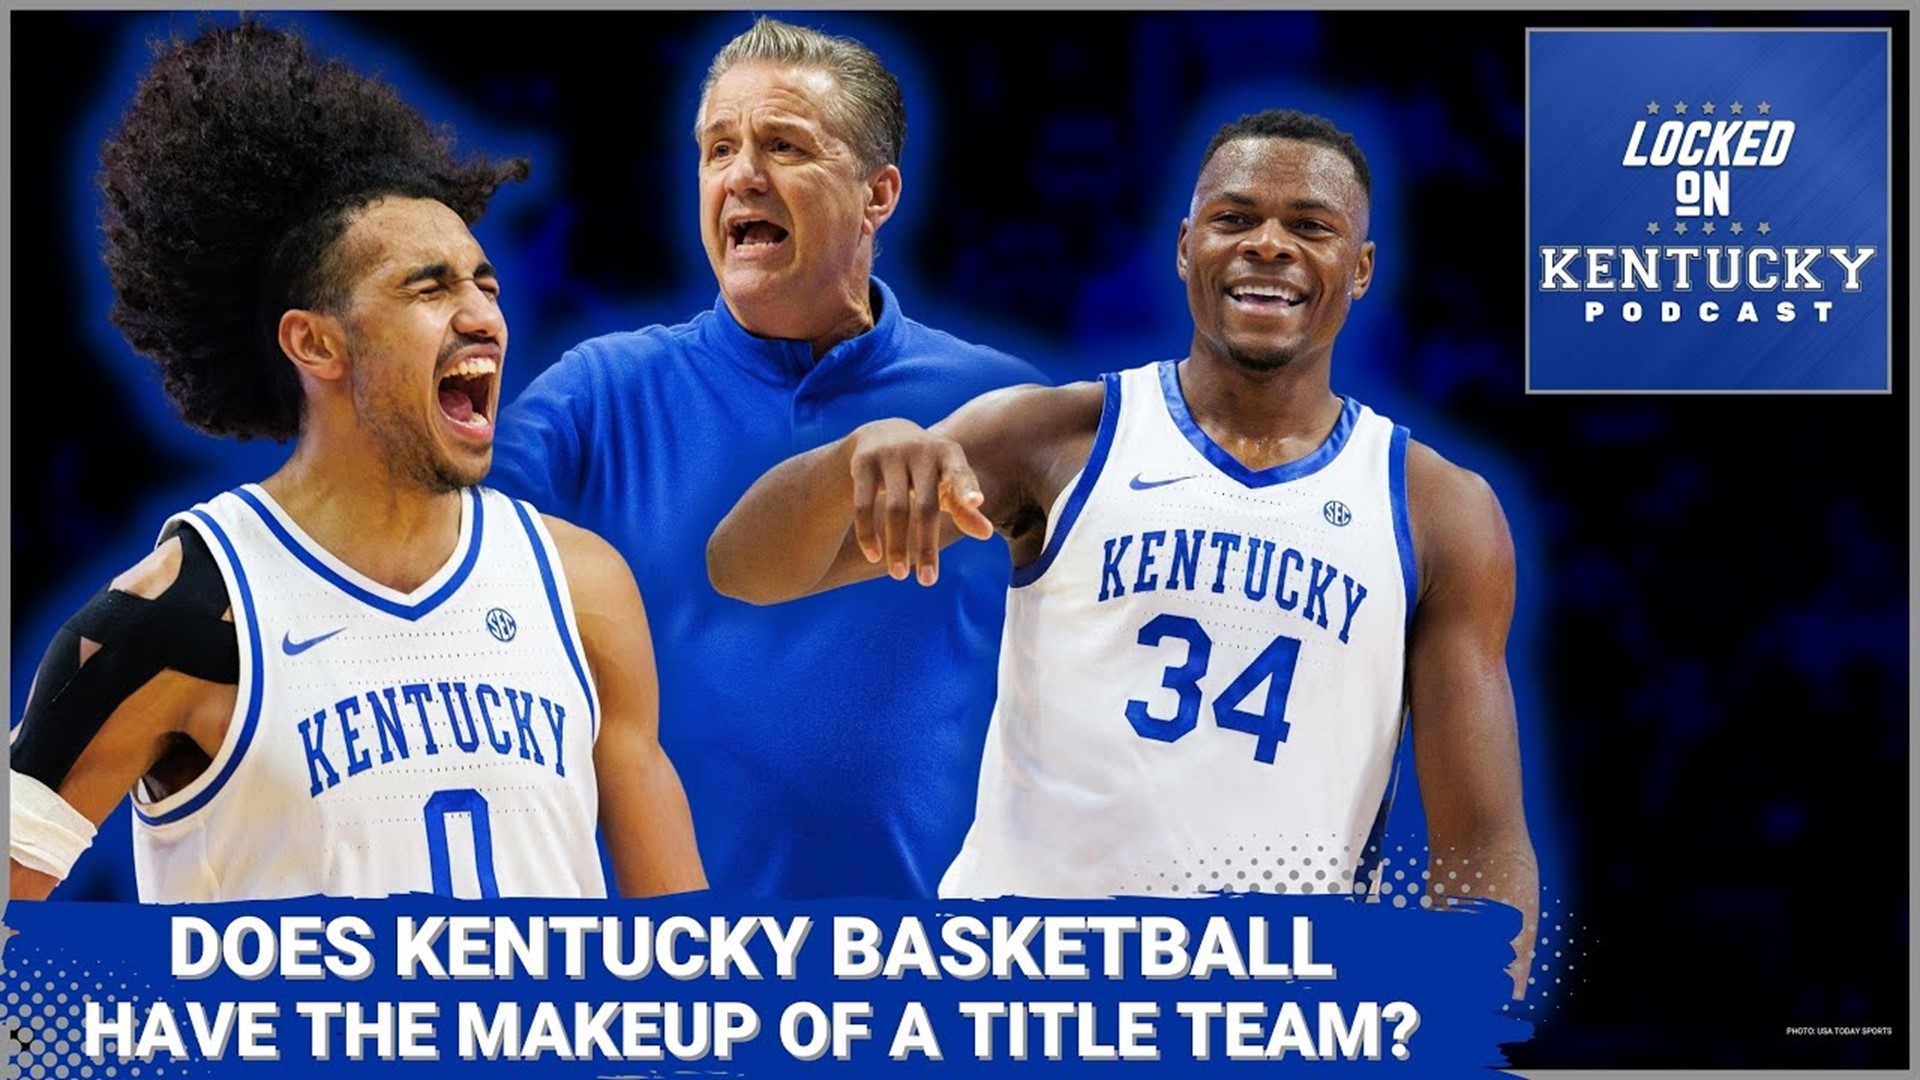 Does Kentucky basketball have what it takes to make a run in March Madness?